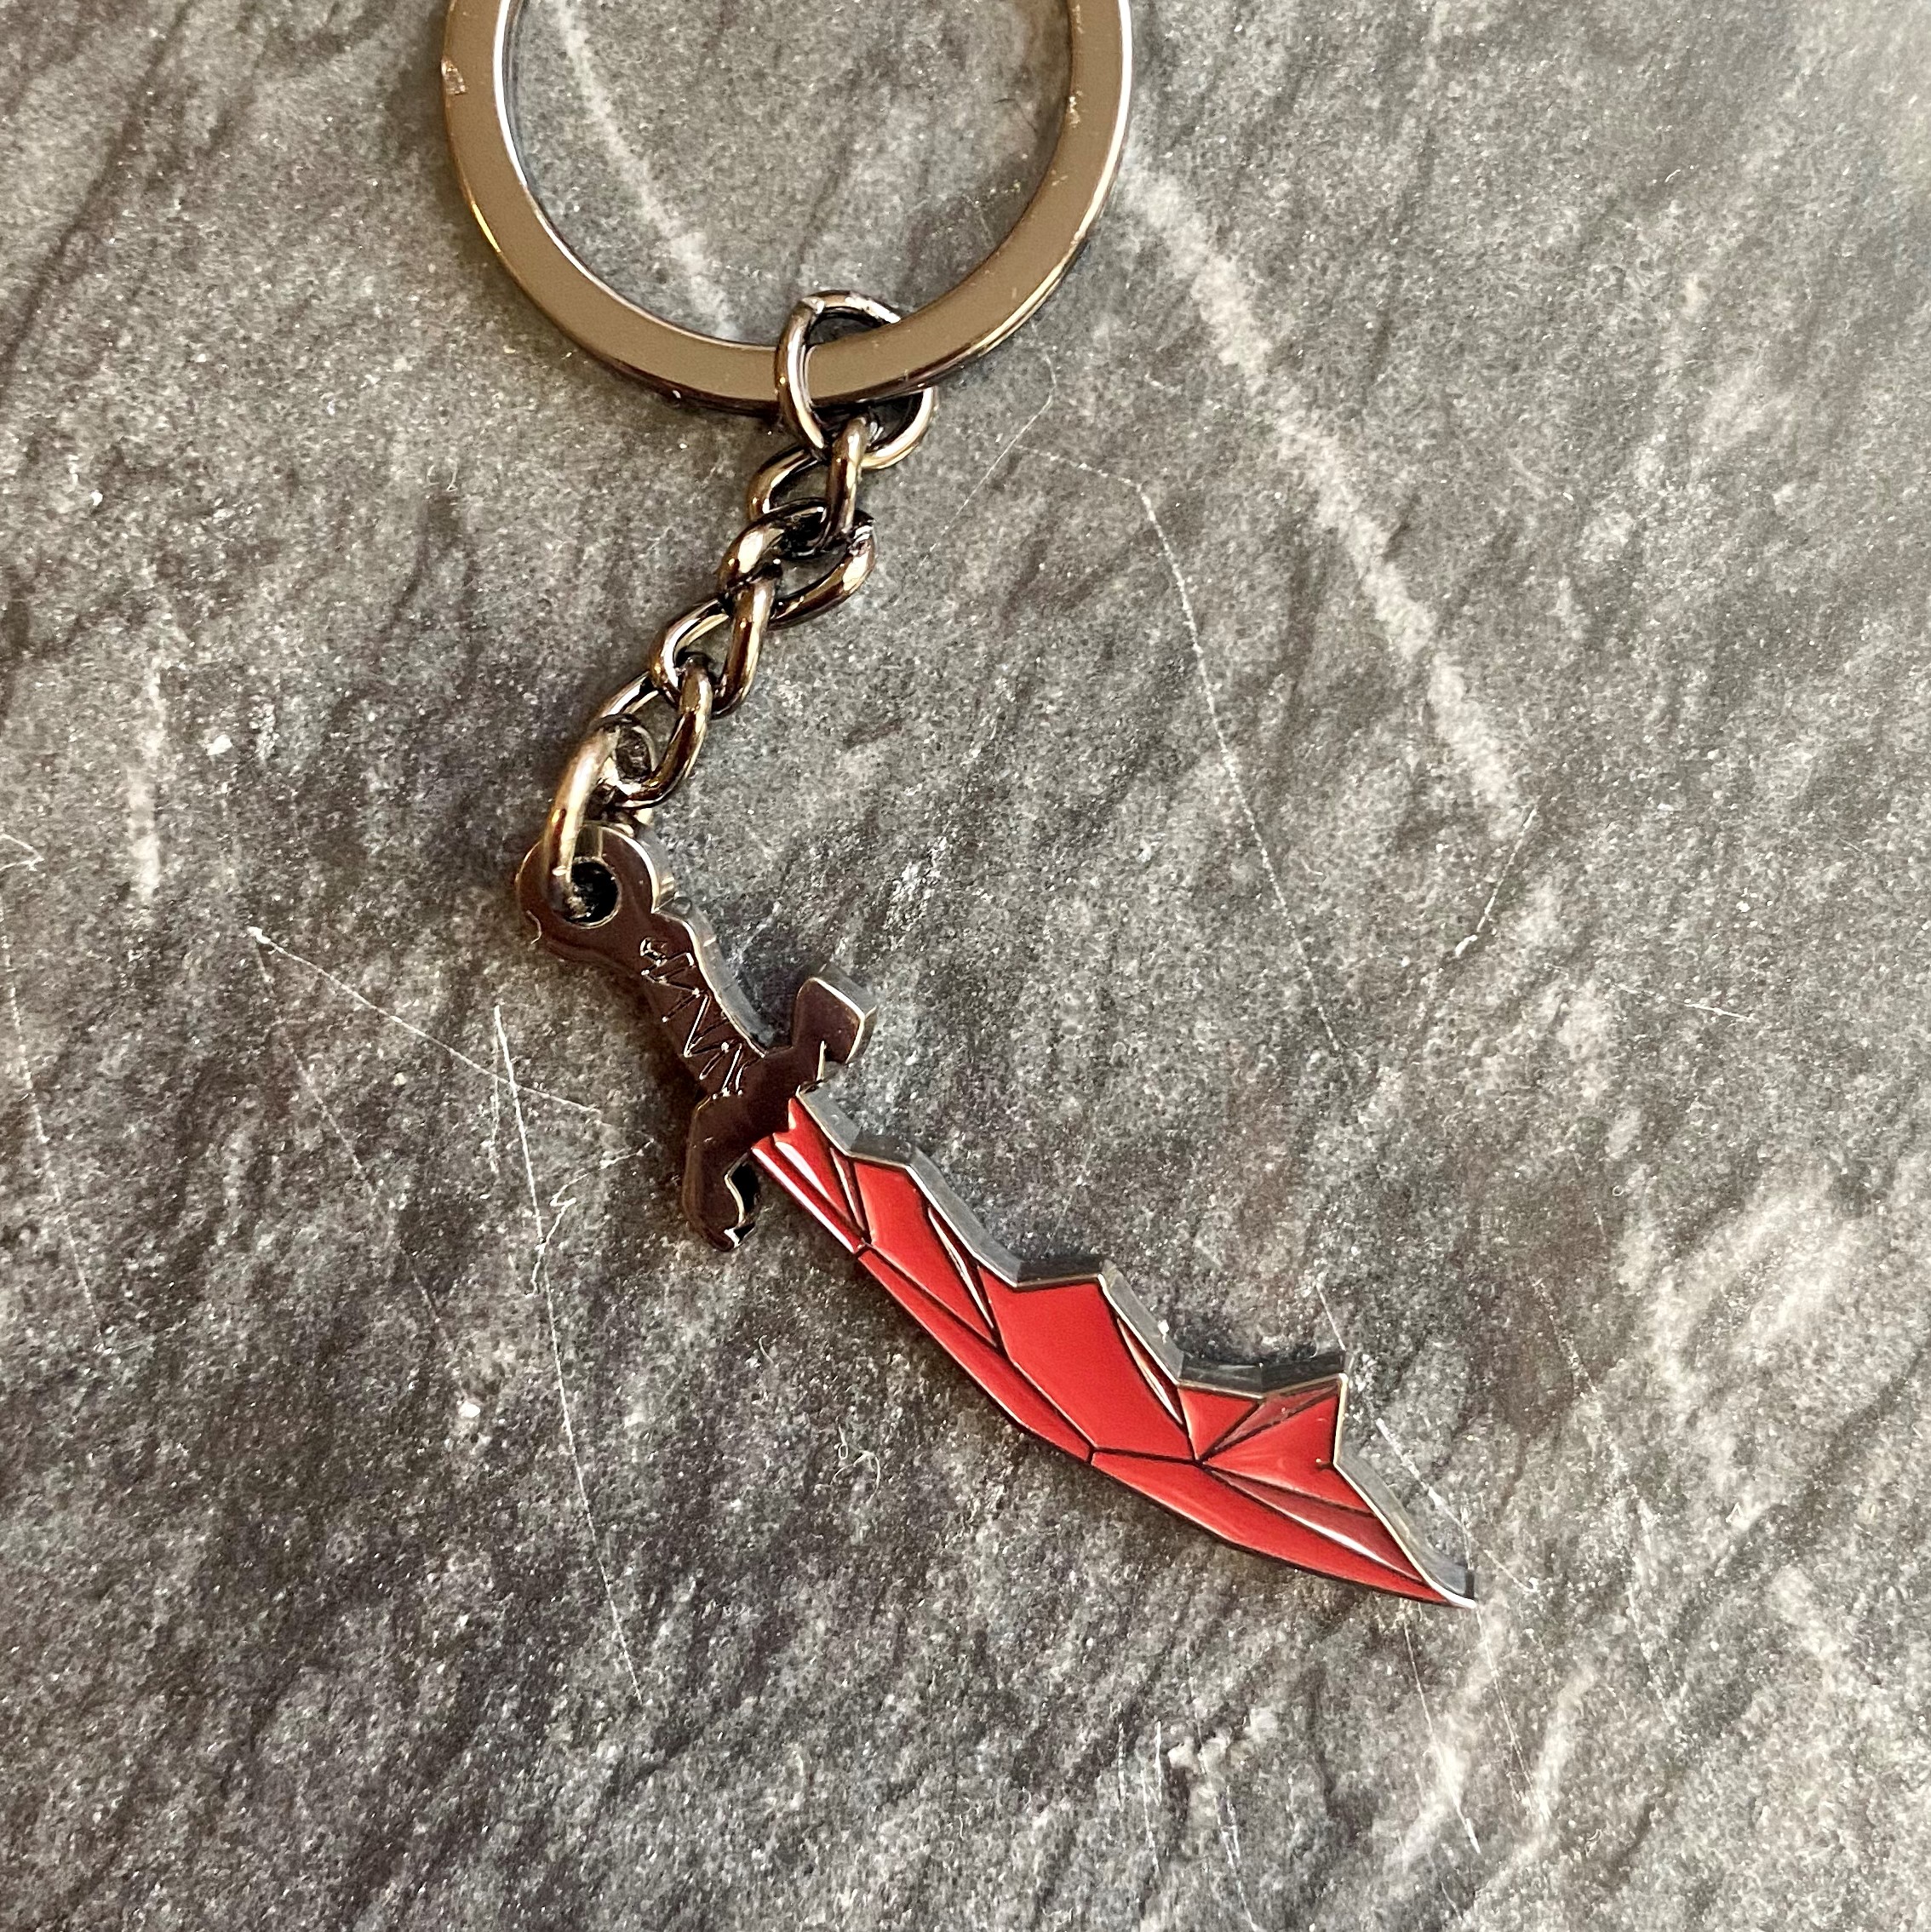 schroef spectrum shuttle Old School RuneScape on Twitter: "🛒 Treat yourself to some new exclusives  from @AngelsScapes! Including: ⚔ Dragon Scimitar Keyring 🧙‍♂️ Ibans Staff  Pin 👑 Magic and Runecrafting Skillcape Keyrings 🏴‍☠️ Or show